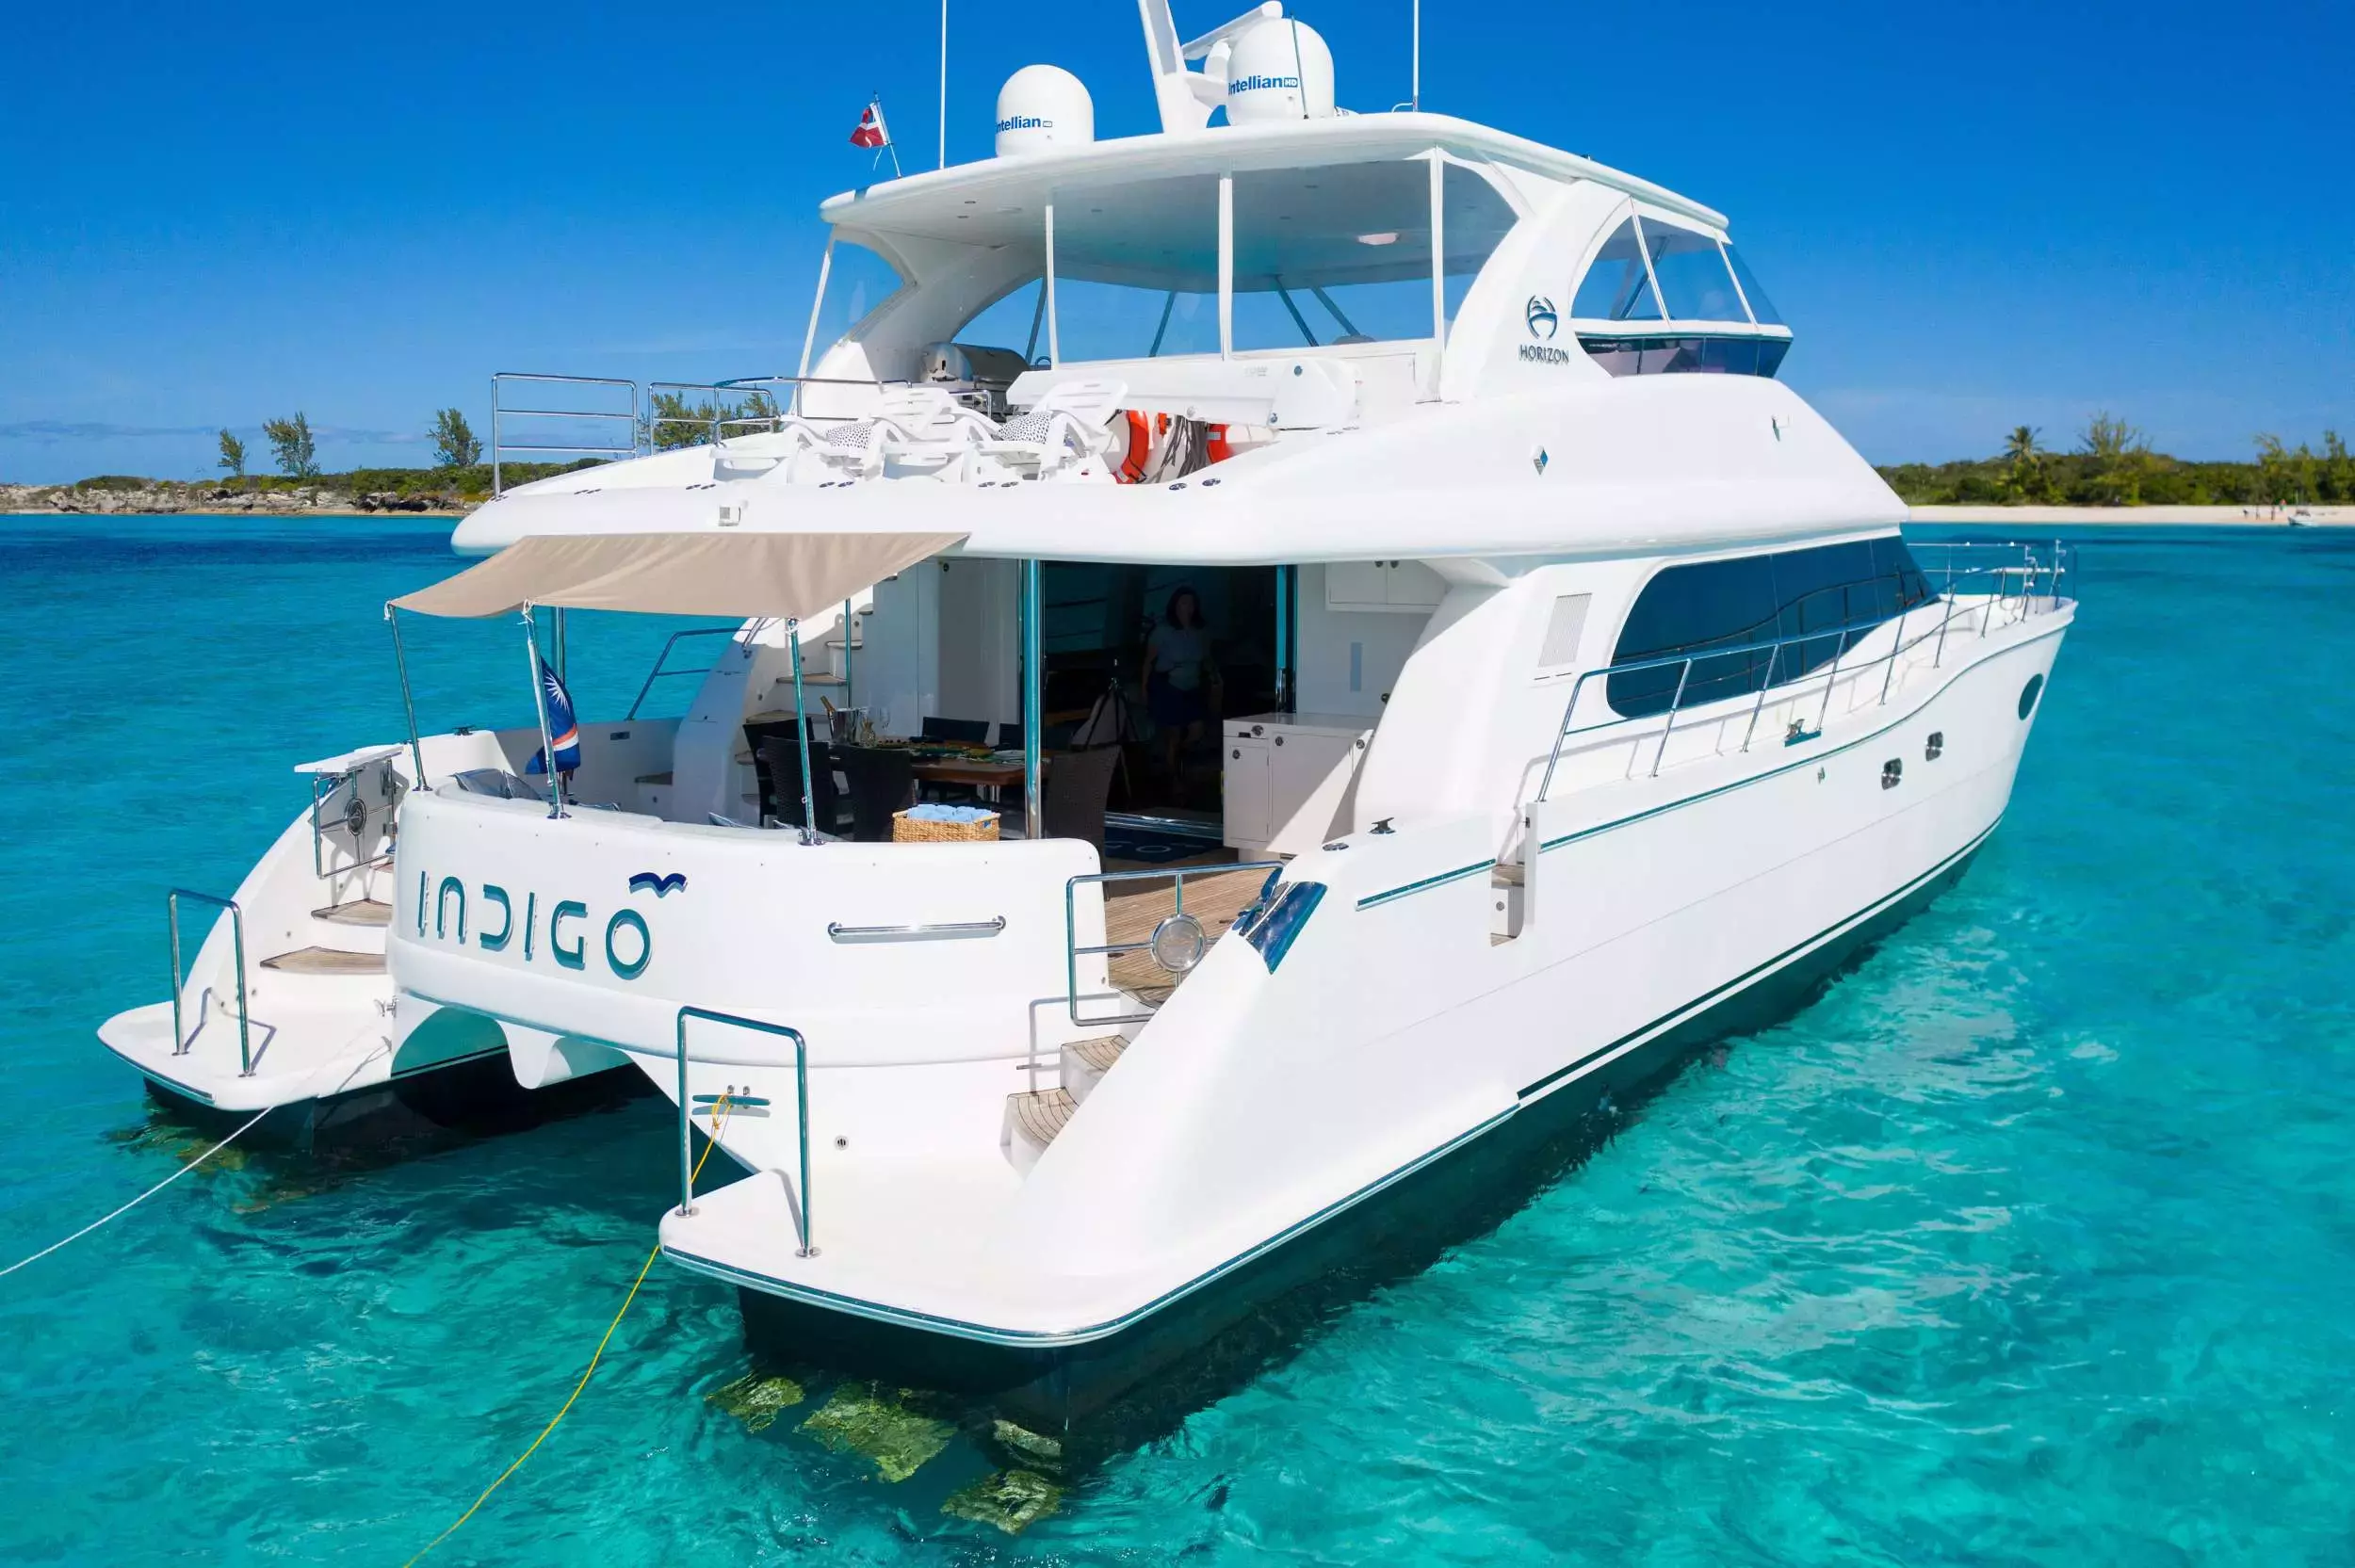 Indigo III by Horizon - Top rates for a Rental of a private Power Catamaran in Bahamas